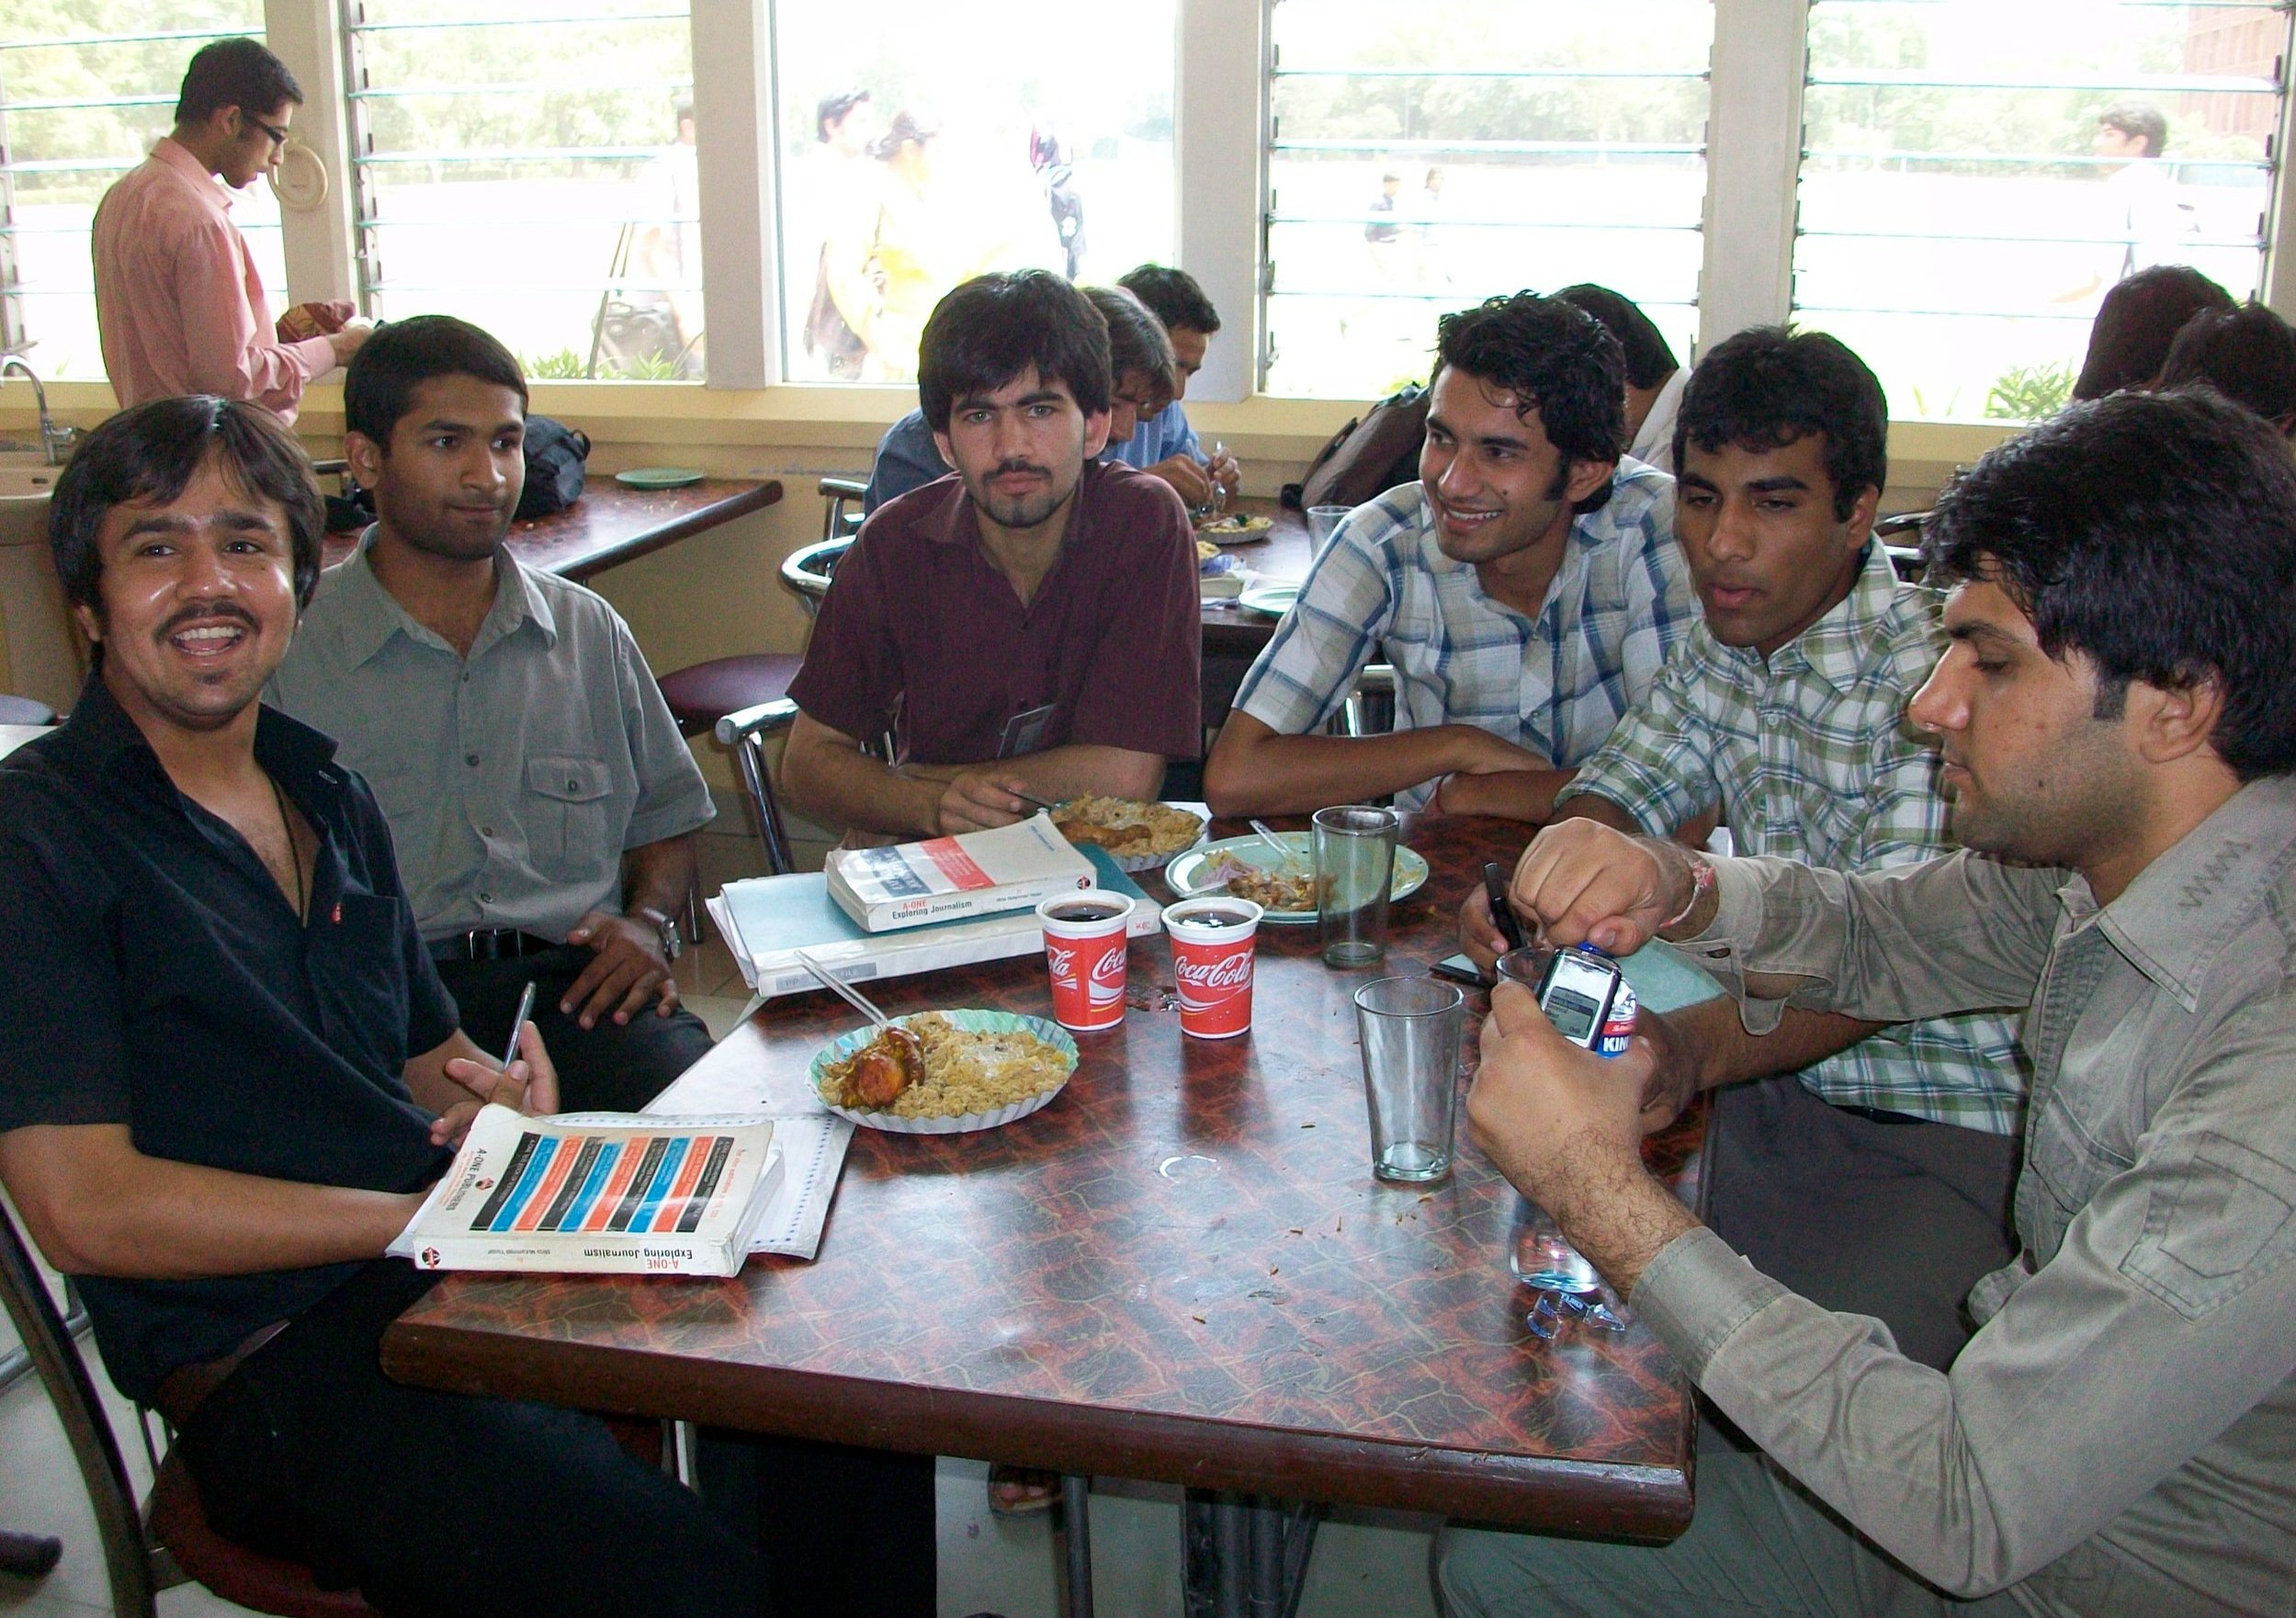   Students gathered in the cafeteria  